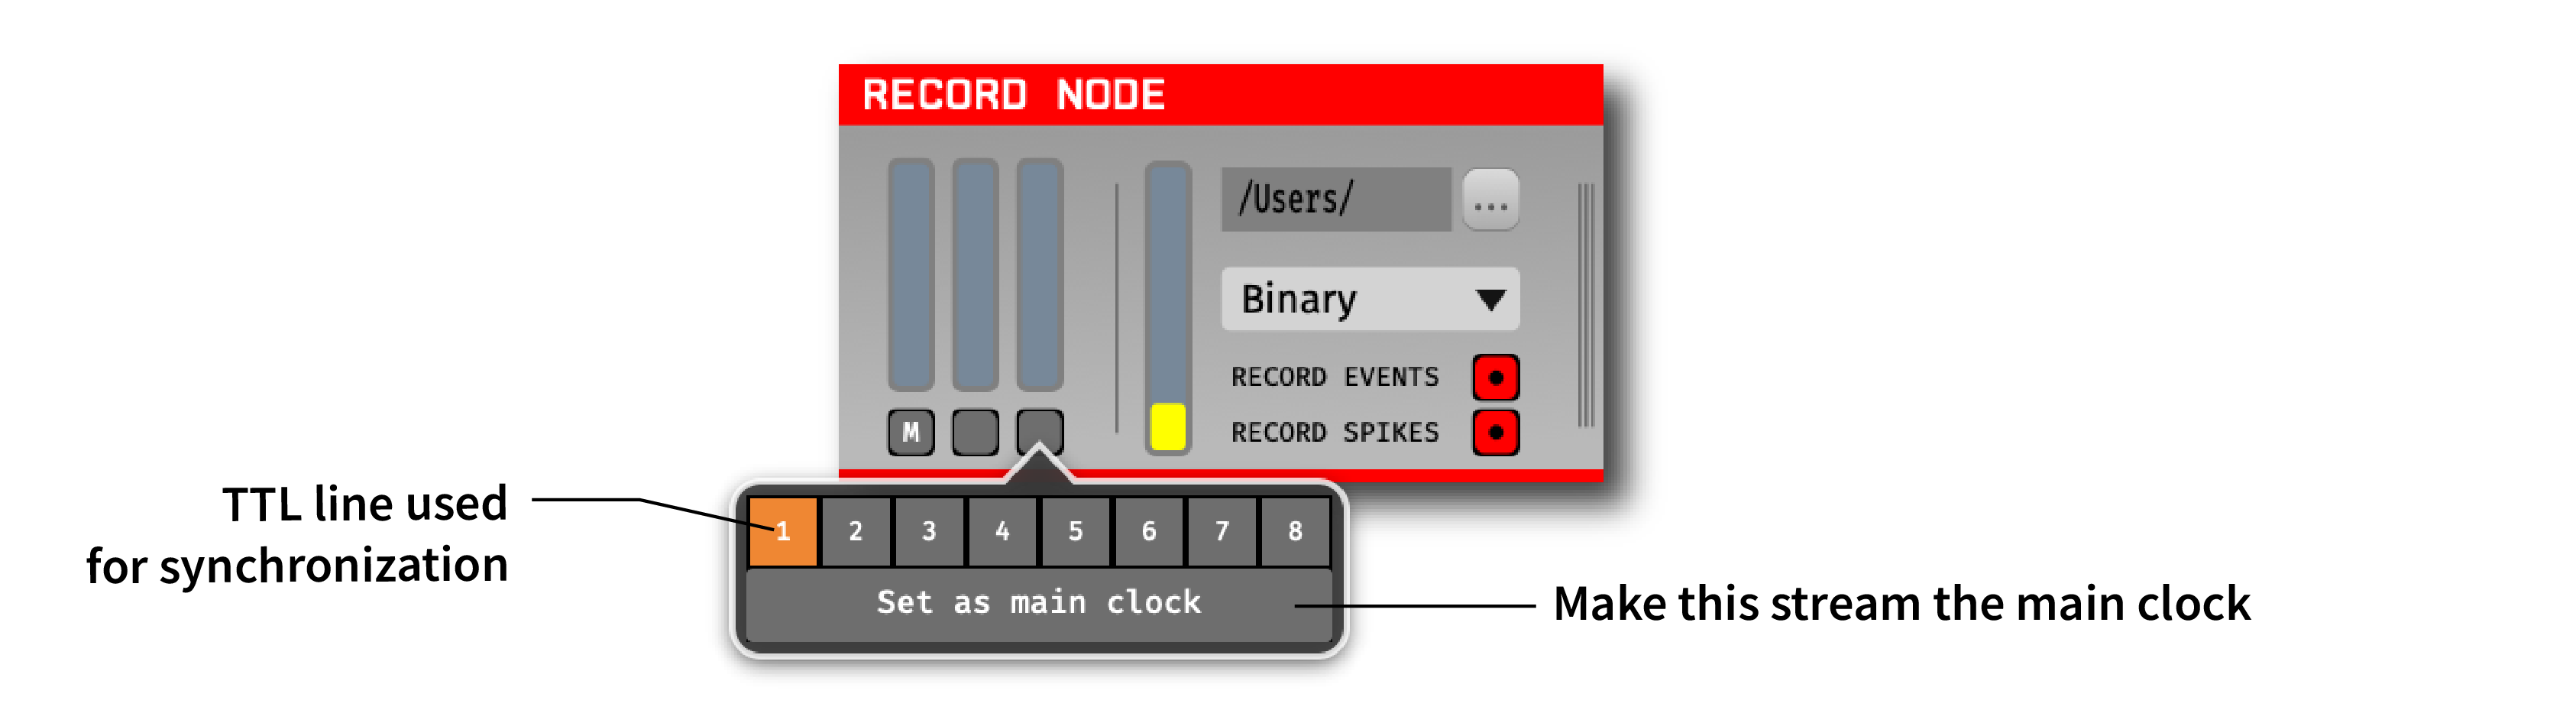 View of the synchronizer interface